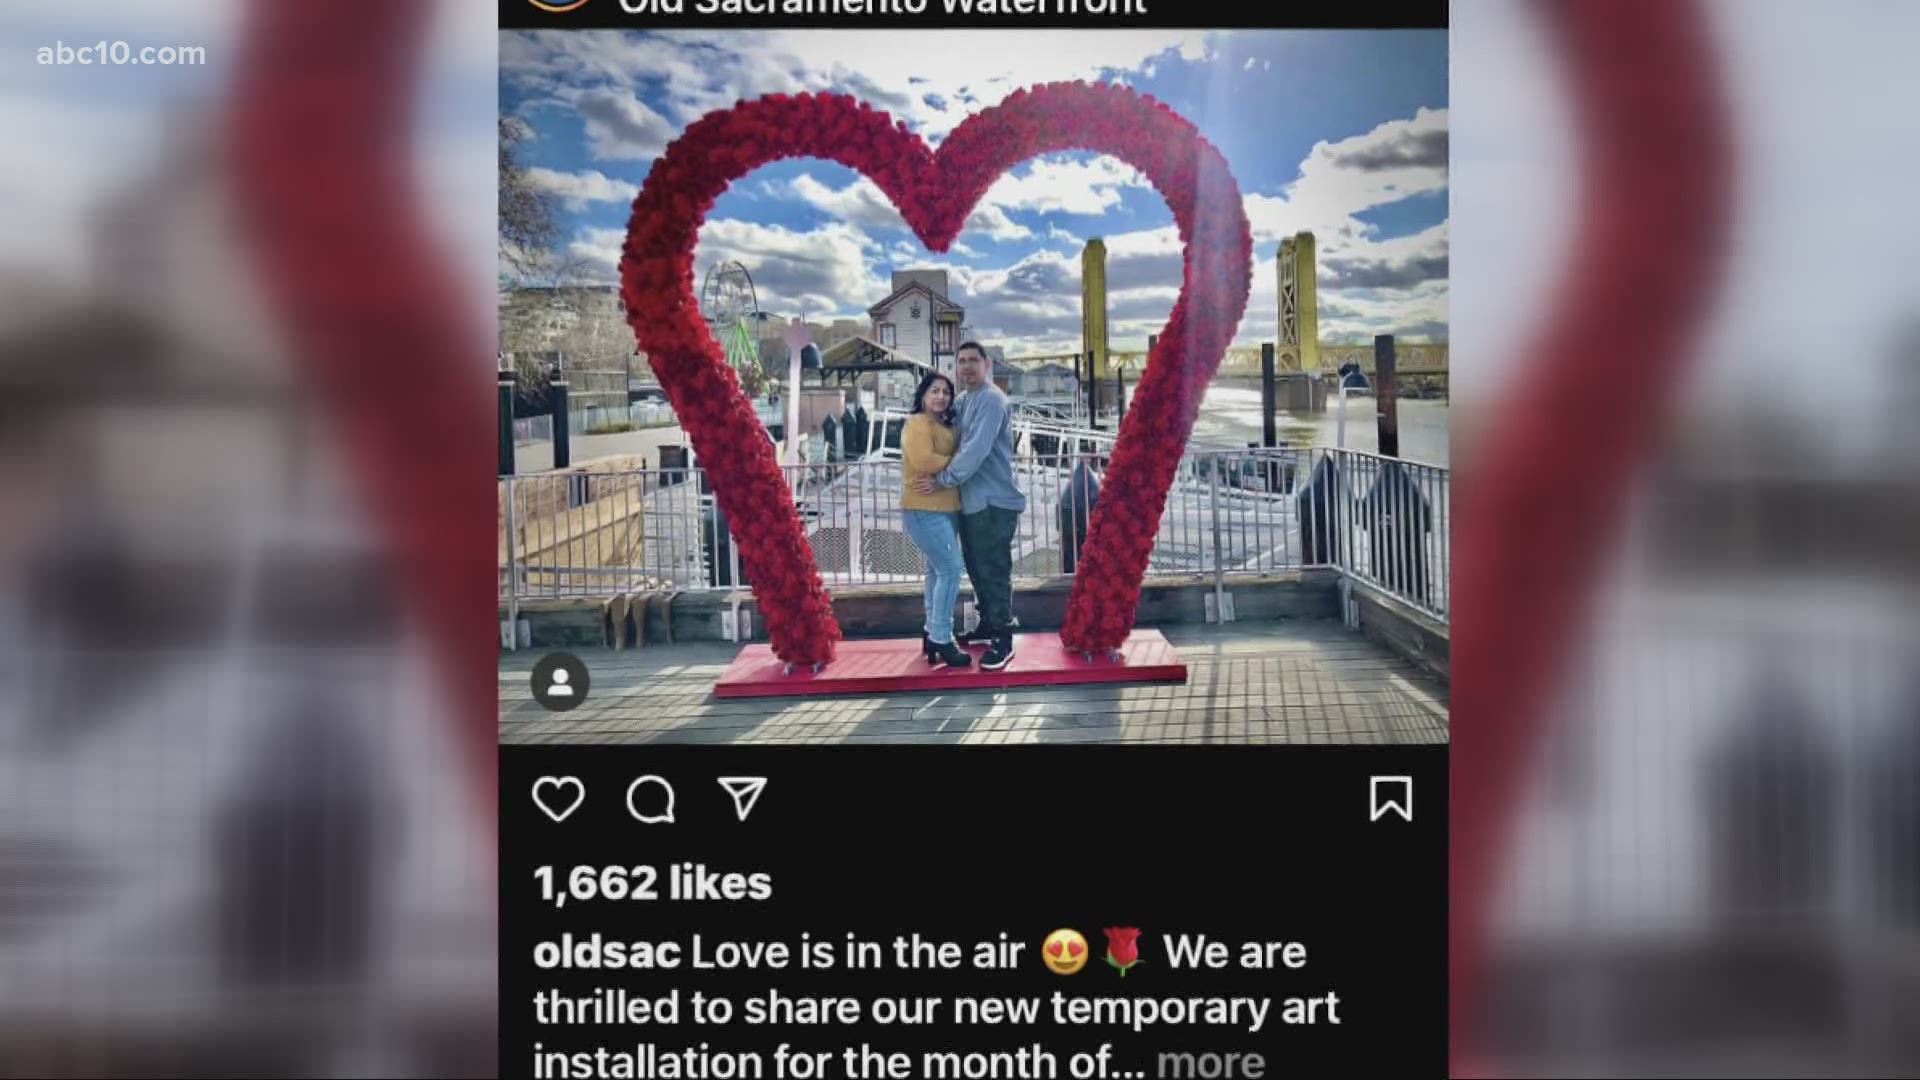 Get the perfect Instagram pic this Valentine's Day with this huge heart installation covered in roses.